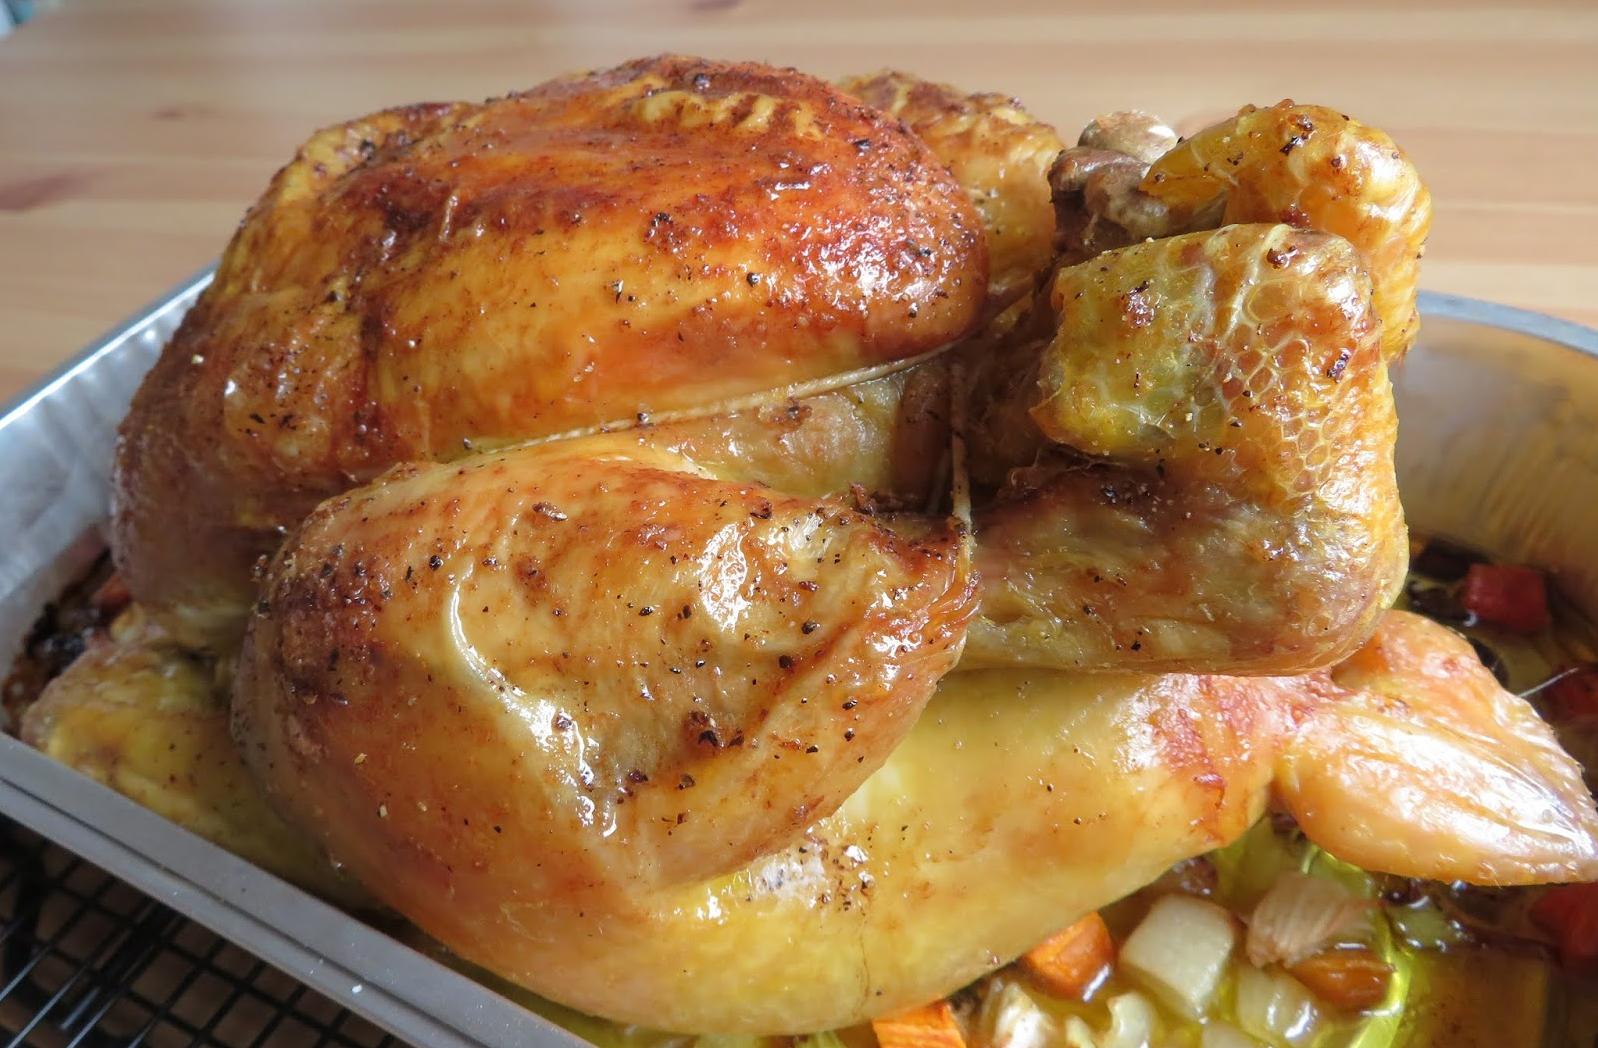  Tender, juicy chicken with crispy skin and rich, savory gravy